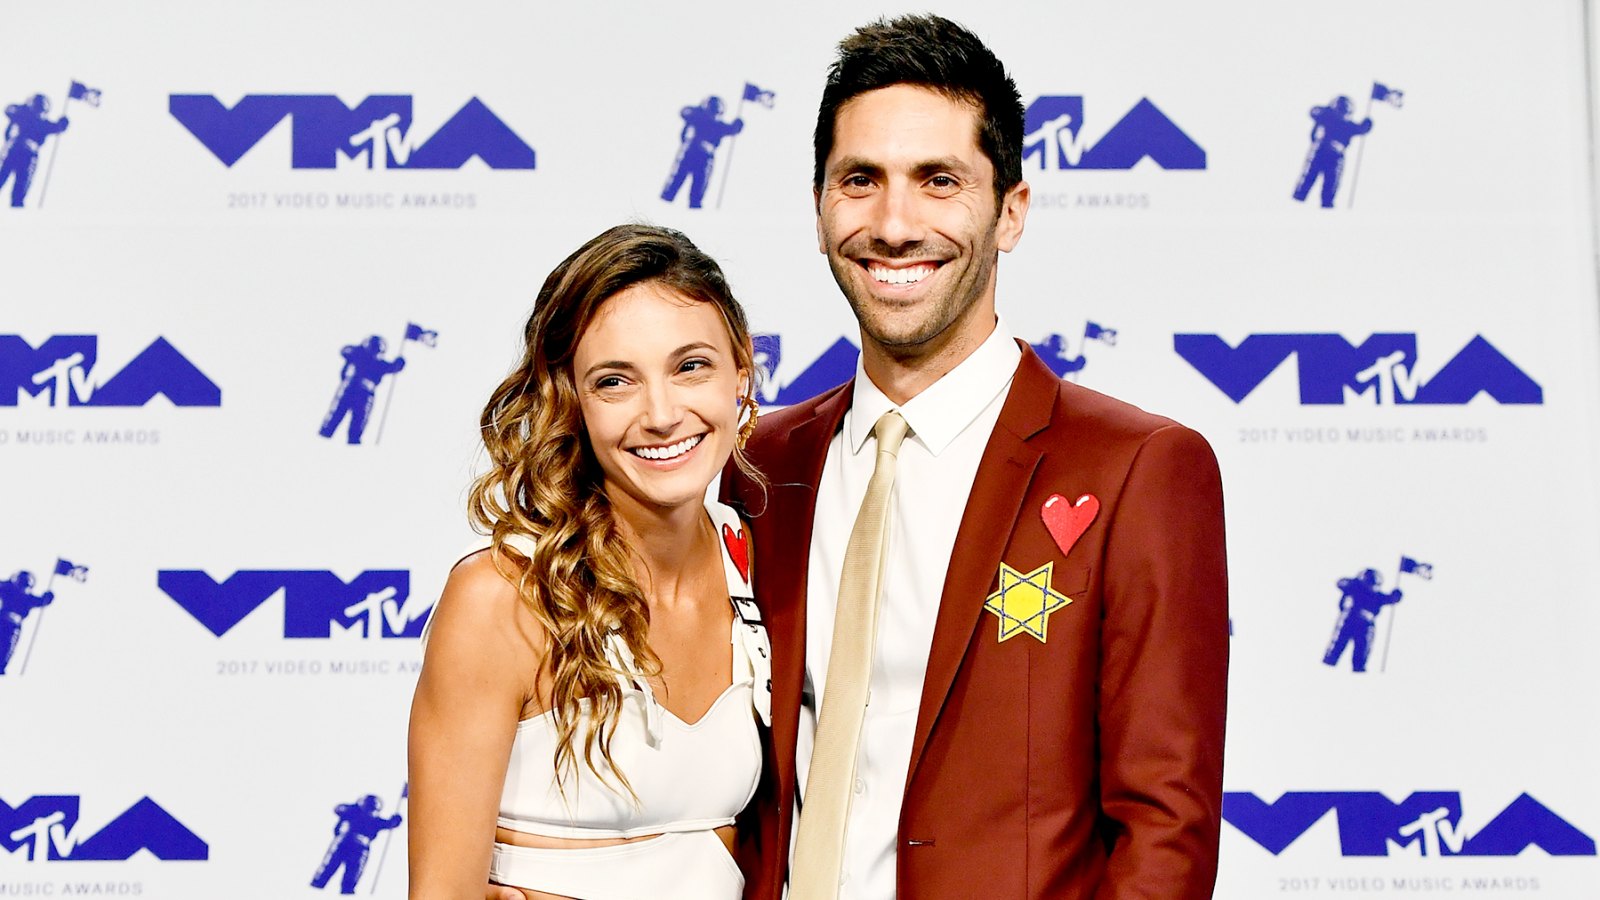 Laura Perlongo and Nev Schulman attend the 2017 MTV Video Music Awards at The Forum on August 27, 2017 in Inglewood, California.